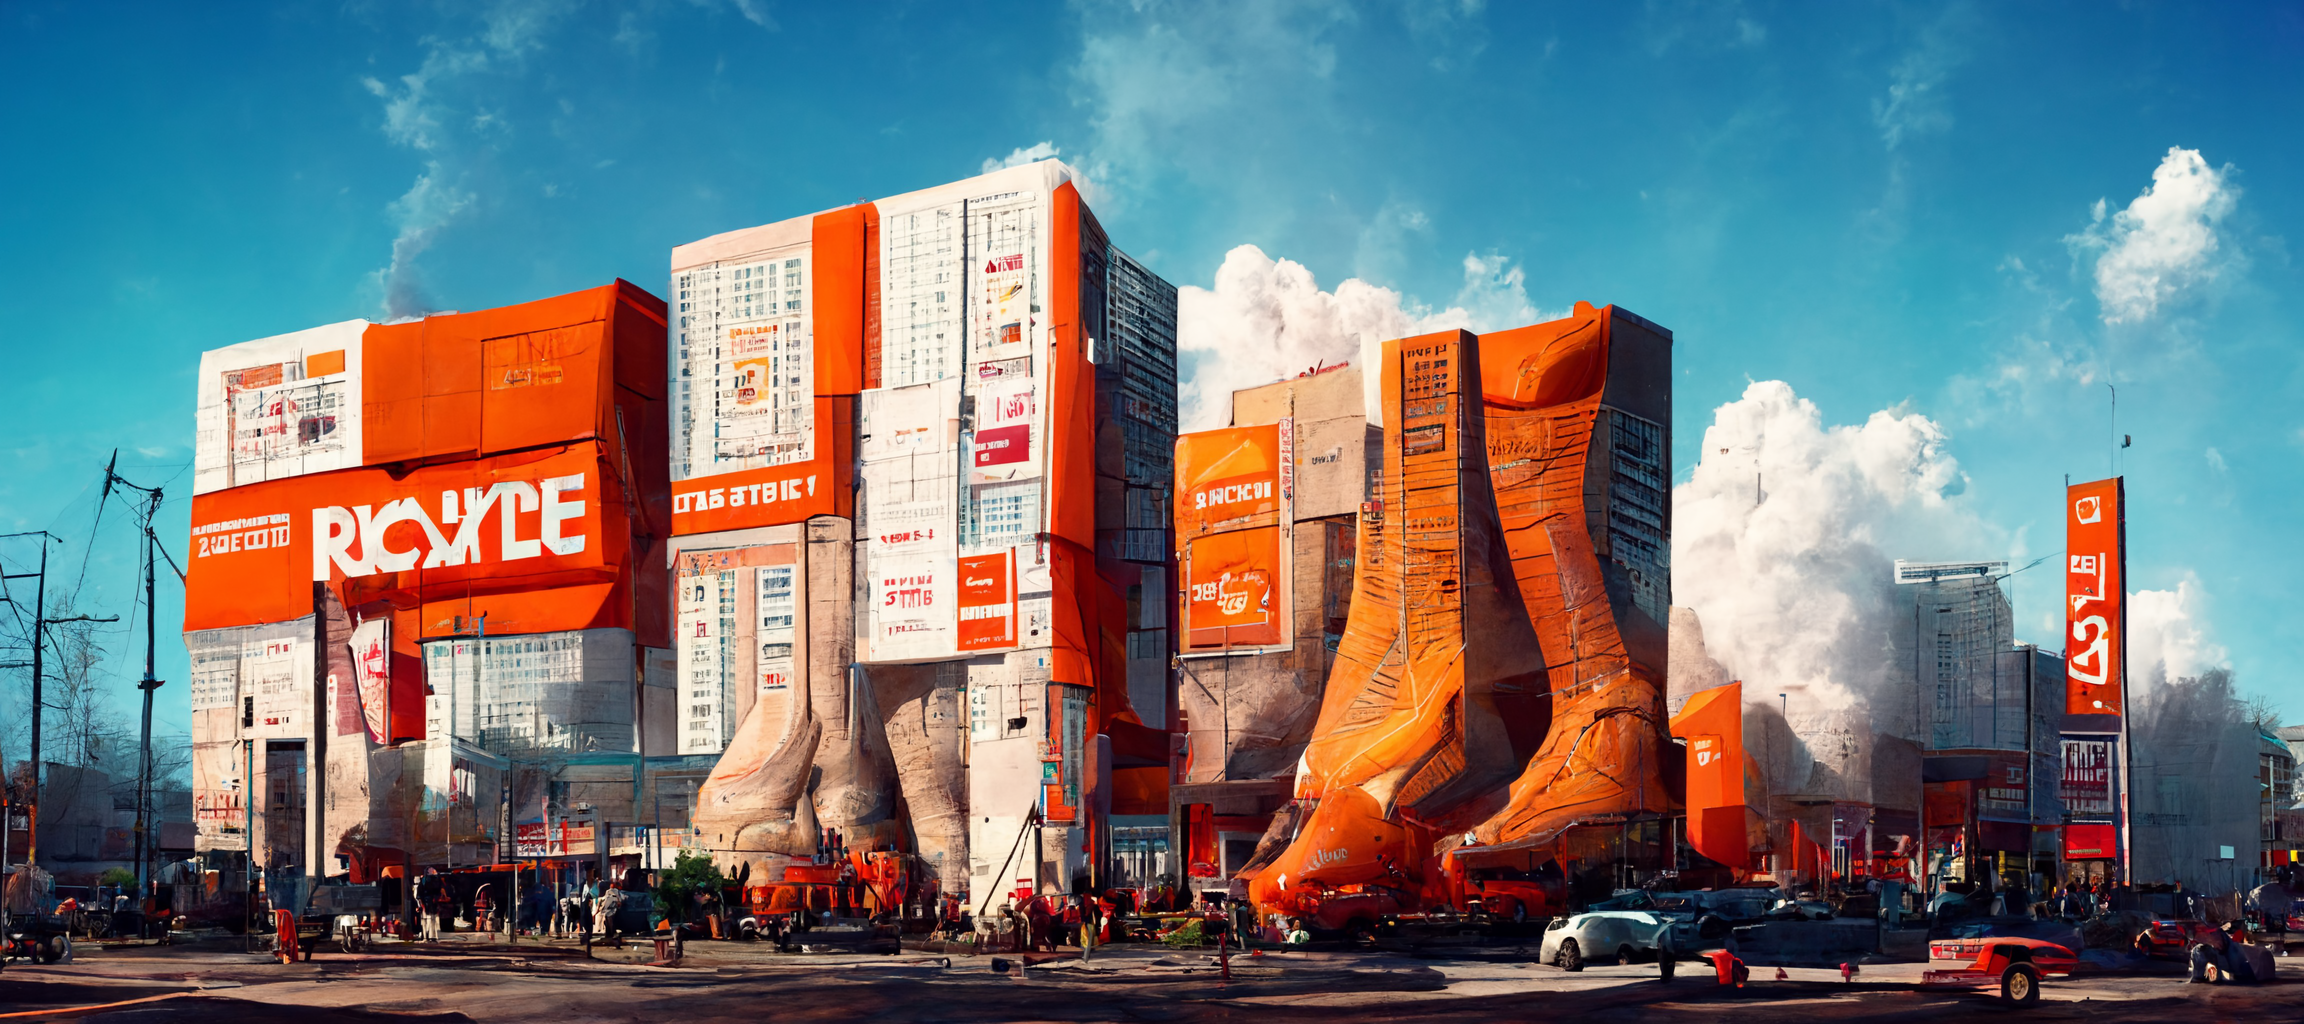 vibe_huge_pile_of_giant_sneakers_towering_over_a_town_photoreal_a93031e0-0ddb-4785-829b-c0d36b5a93ab